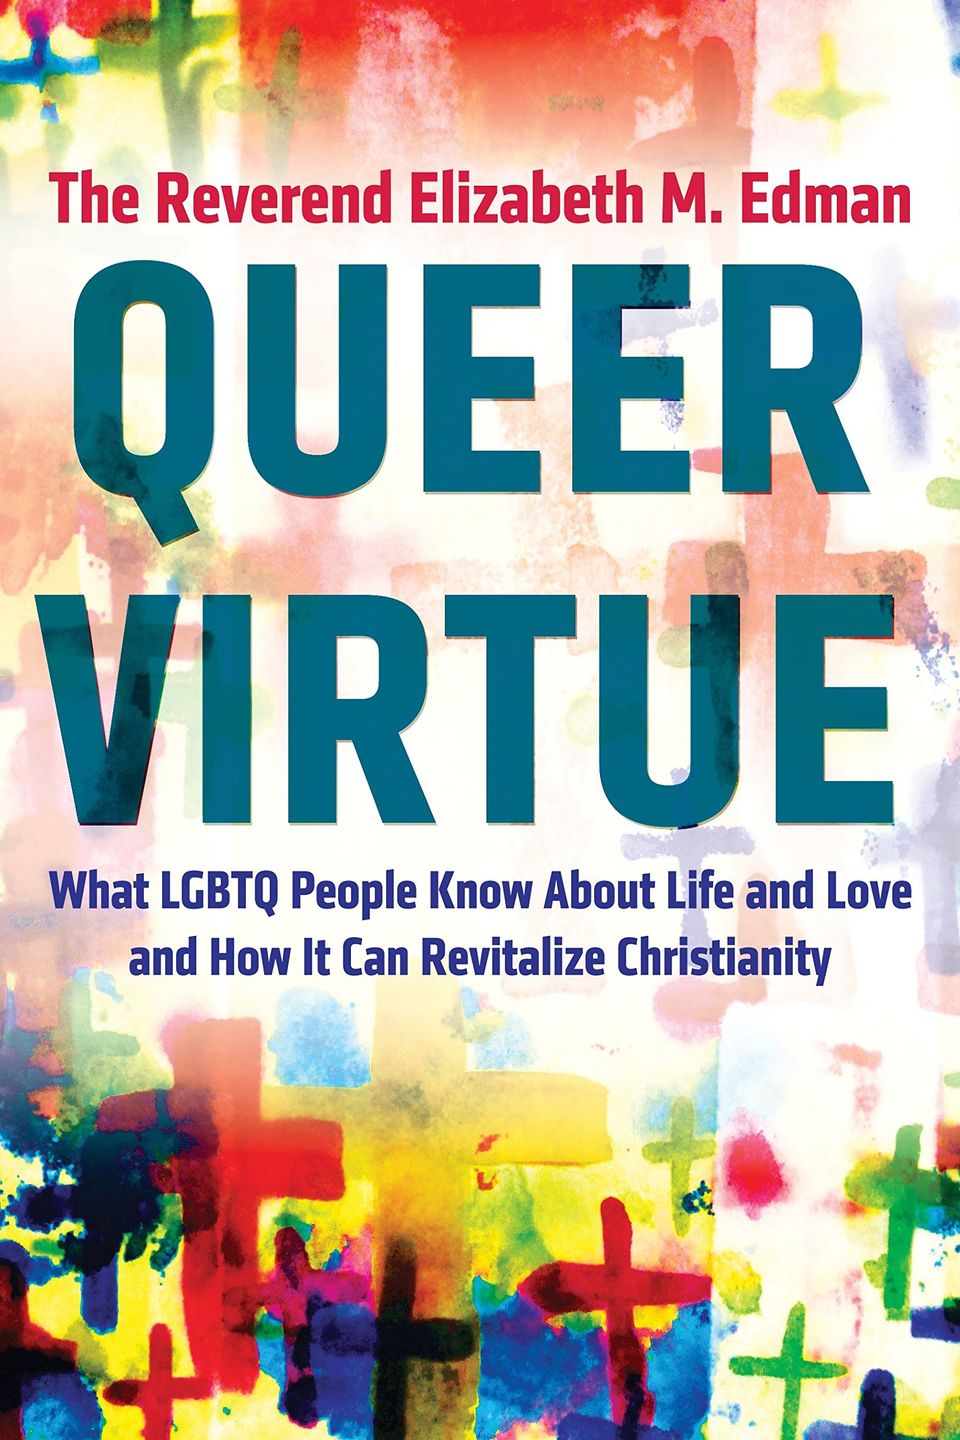 A book cover with the title "Queer Virtue" in teal text ona background of graffiti-style crosses in many different colours.